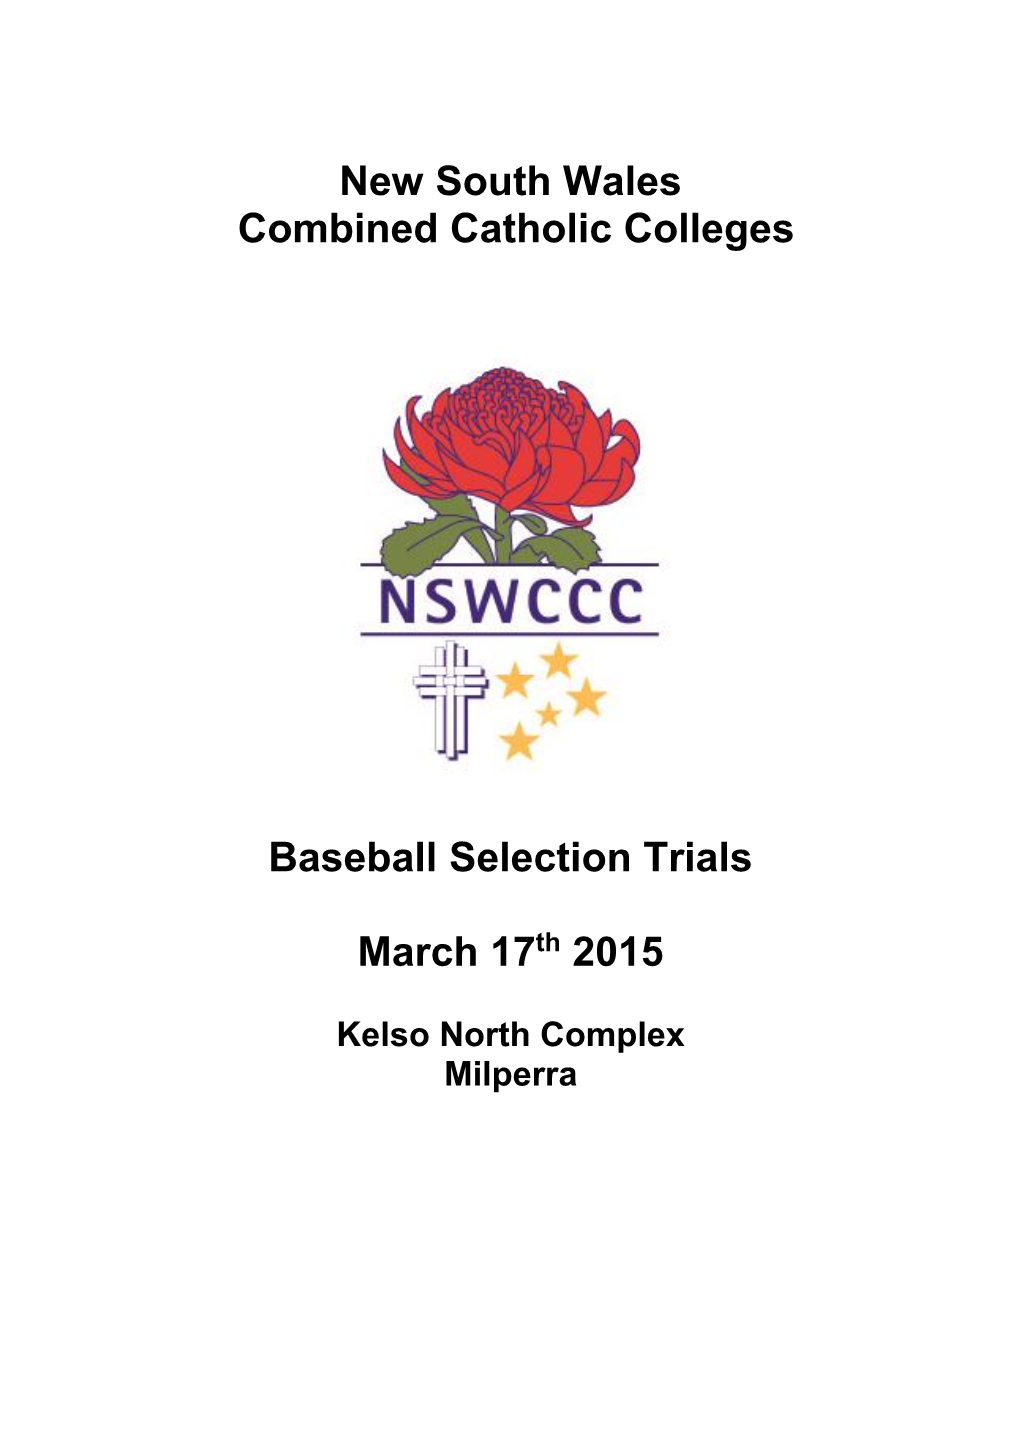 New South Wales Combined Catholic Colleges Baseball Championships